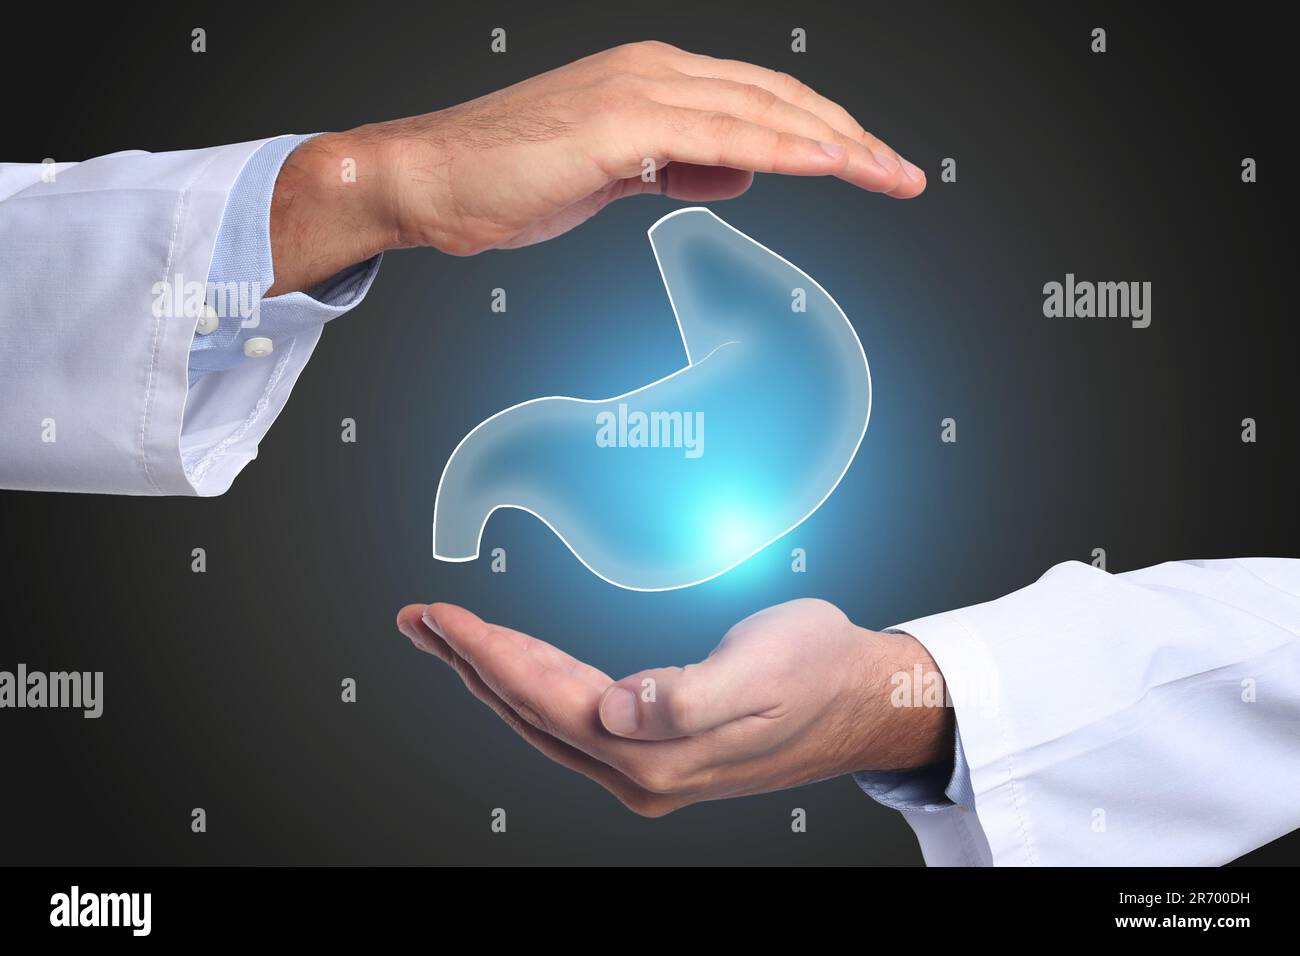 Symptoms and treatment of heartburn and other gastrointestinal diseases. Doctor holding stomach illustration on black background, closeup Stock Photo